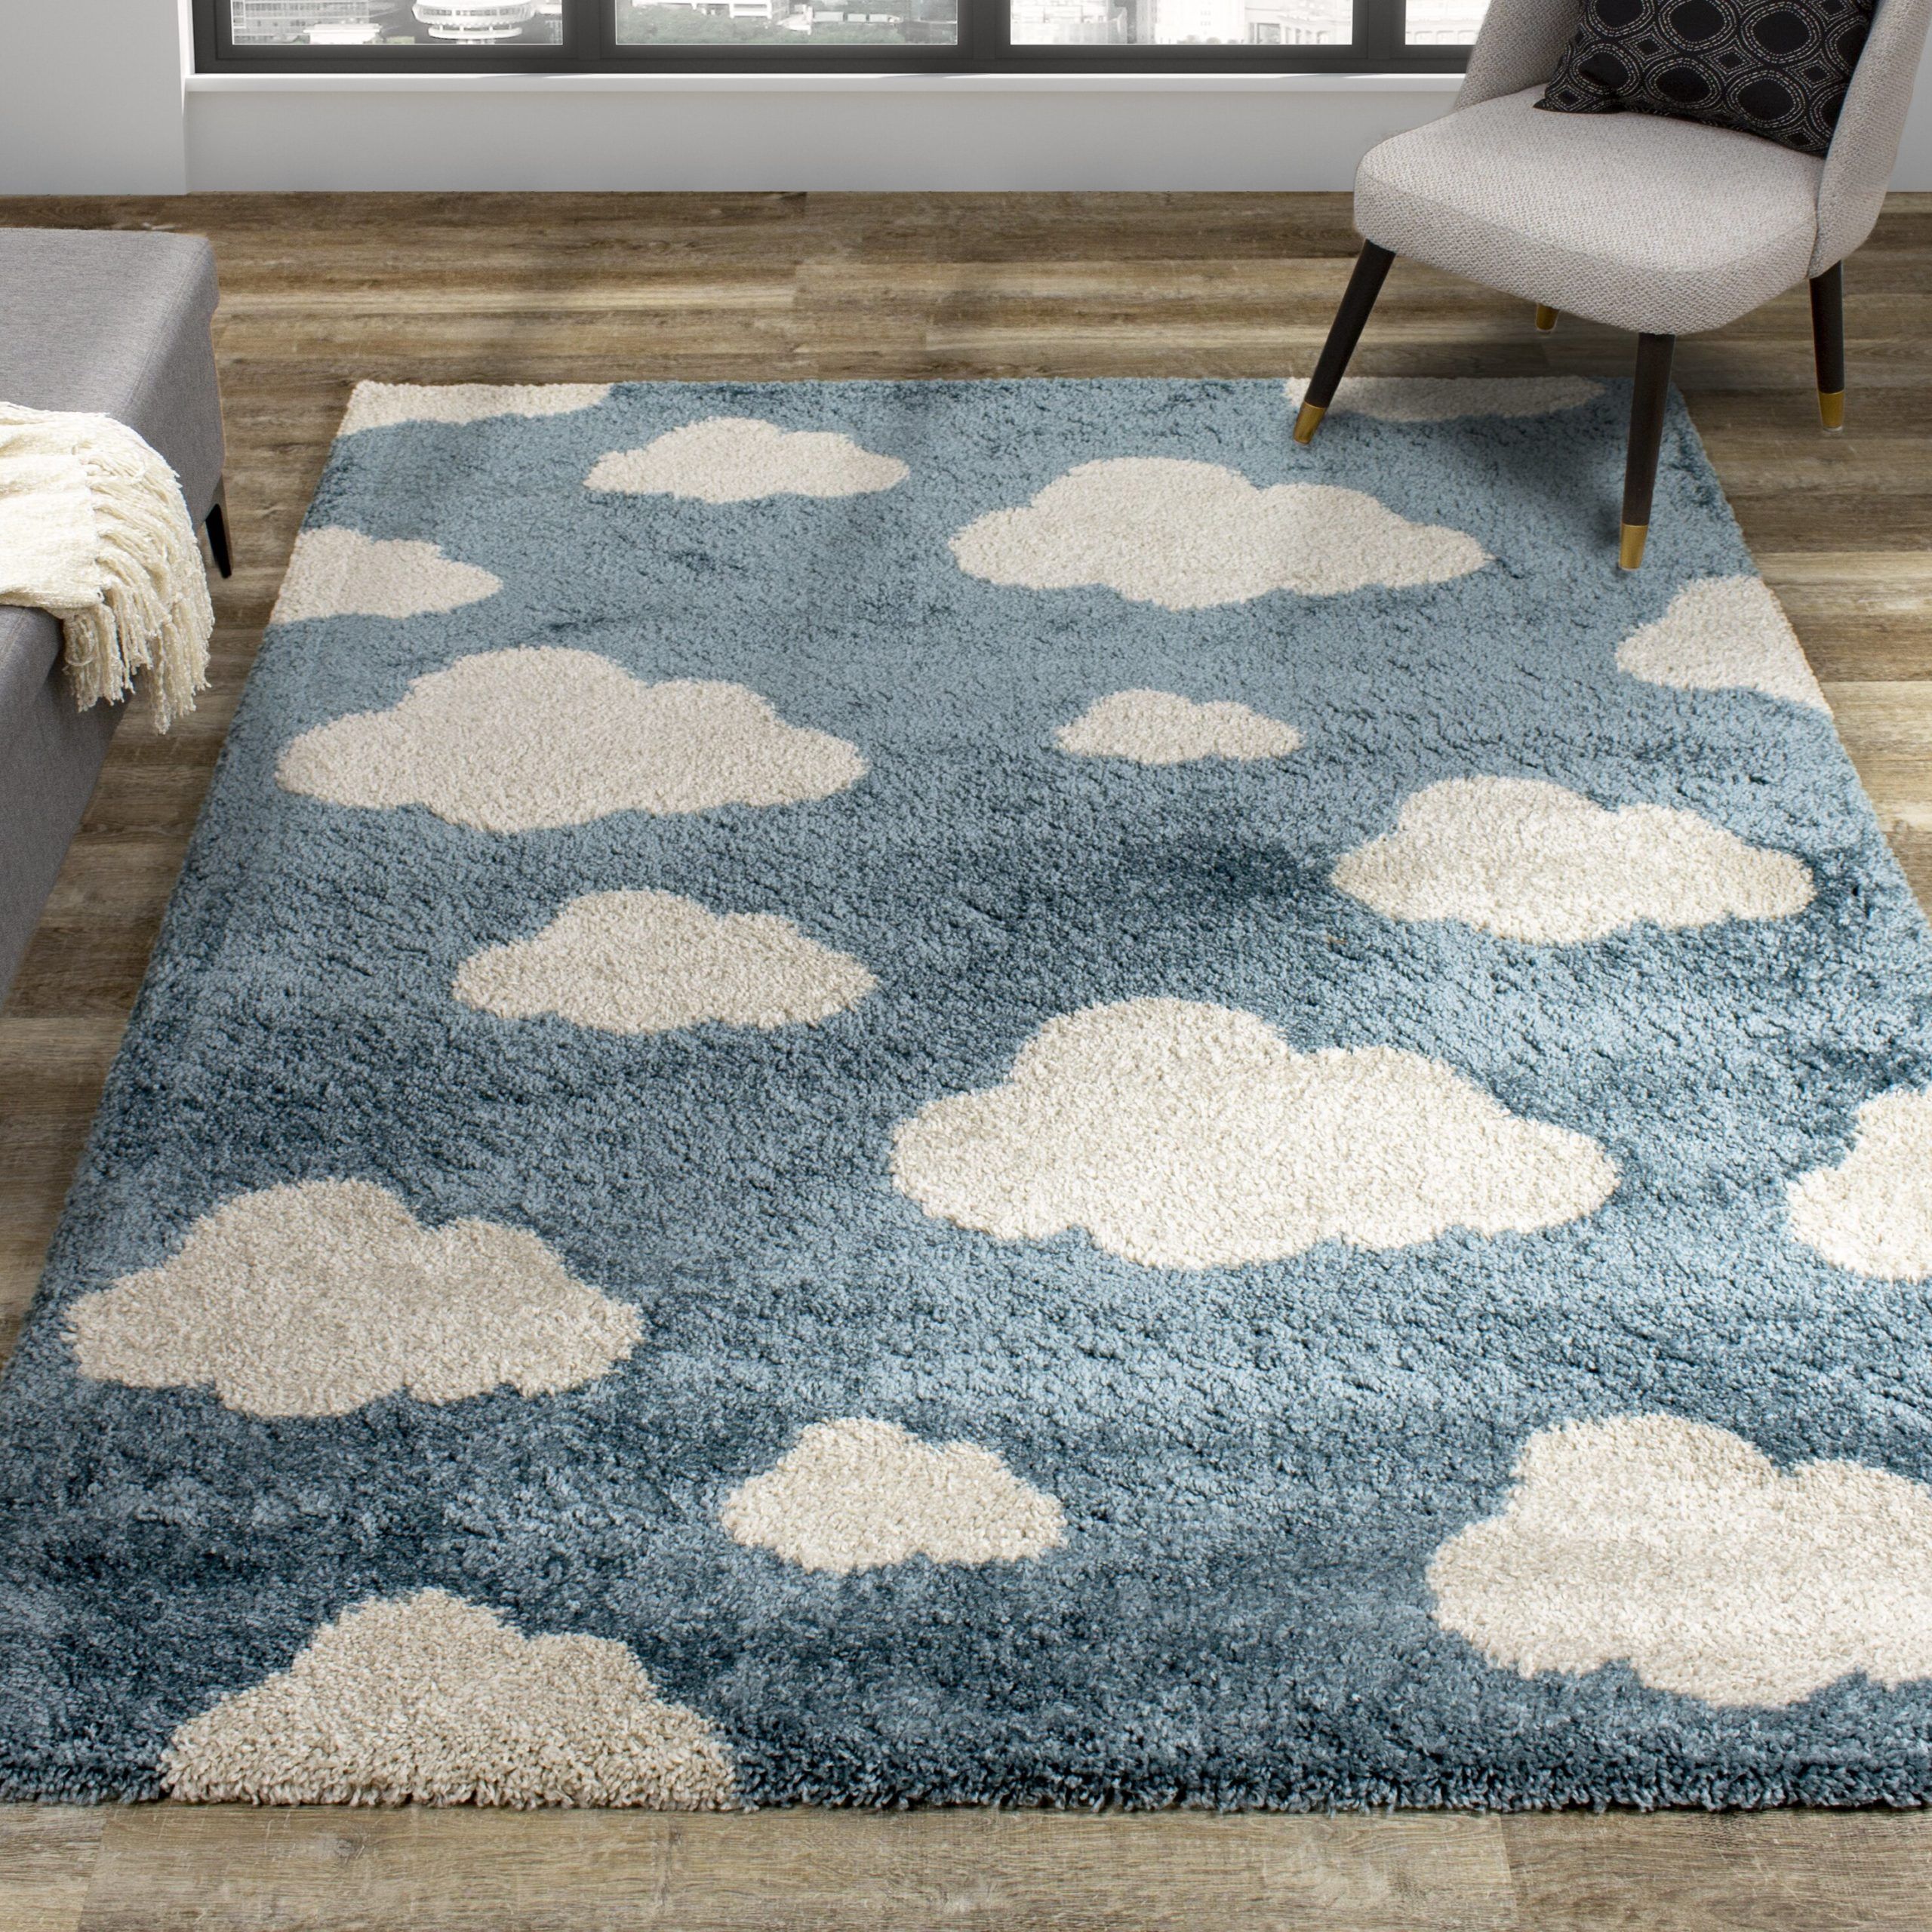 Kids Rug for a More Comfortable Room